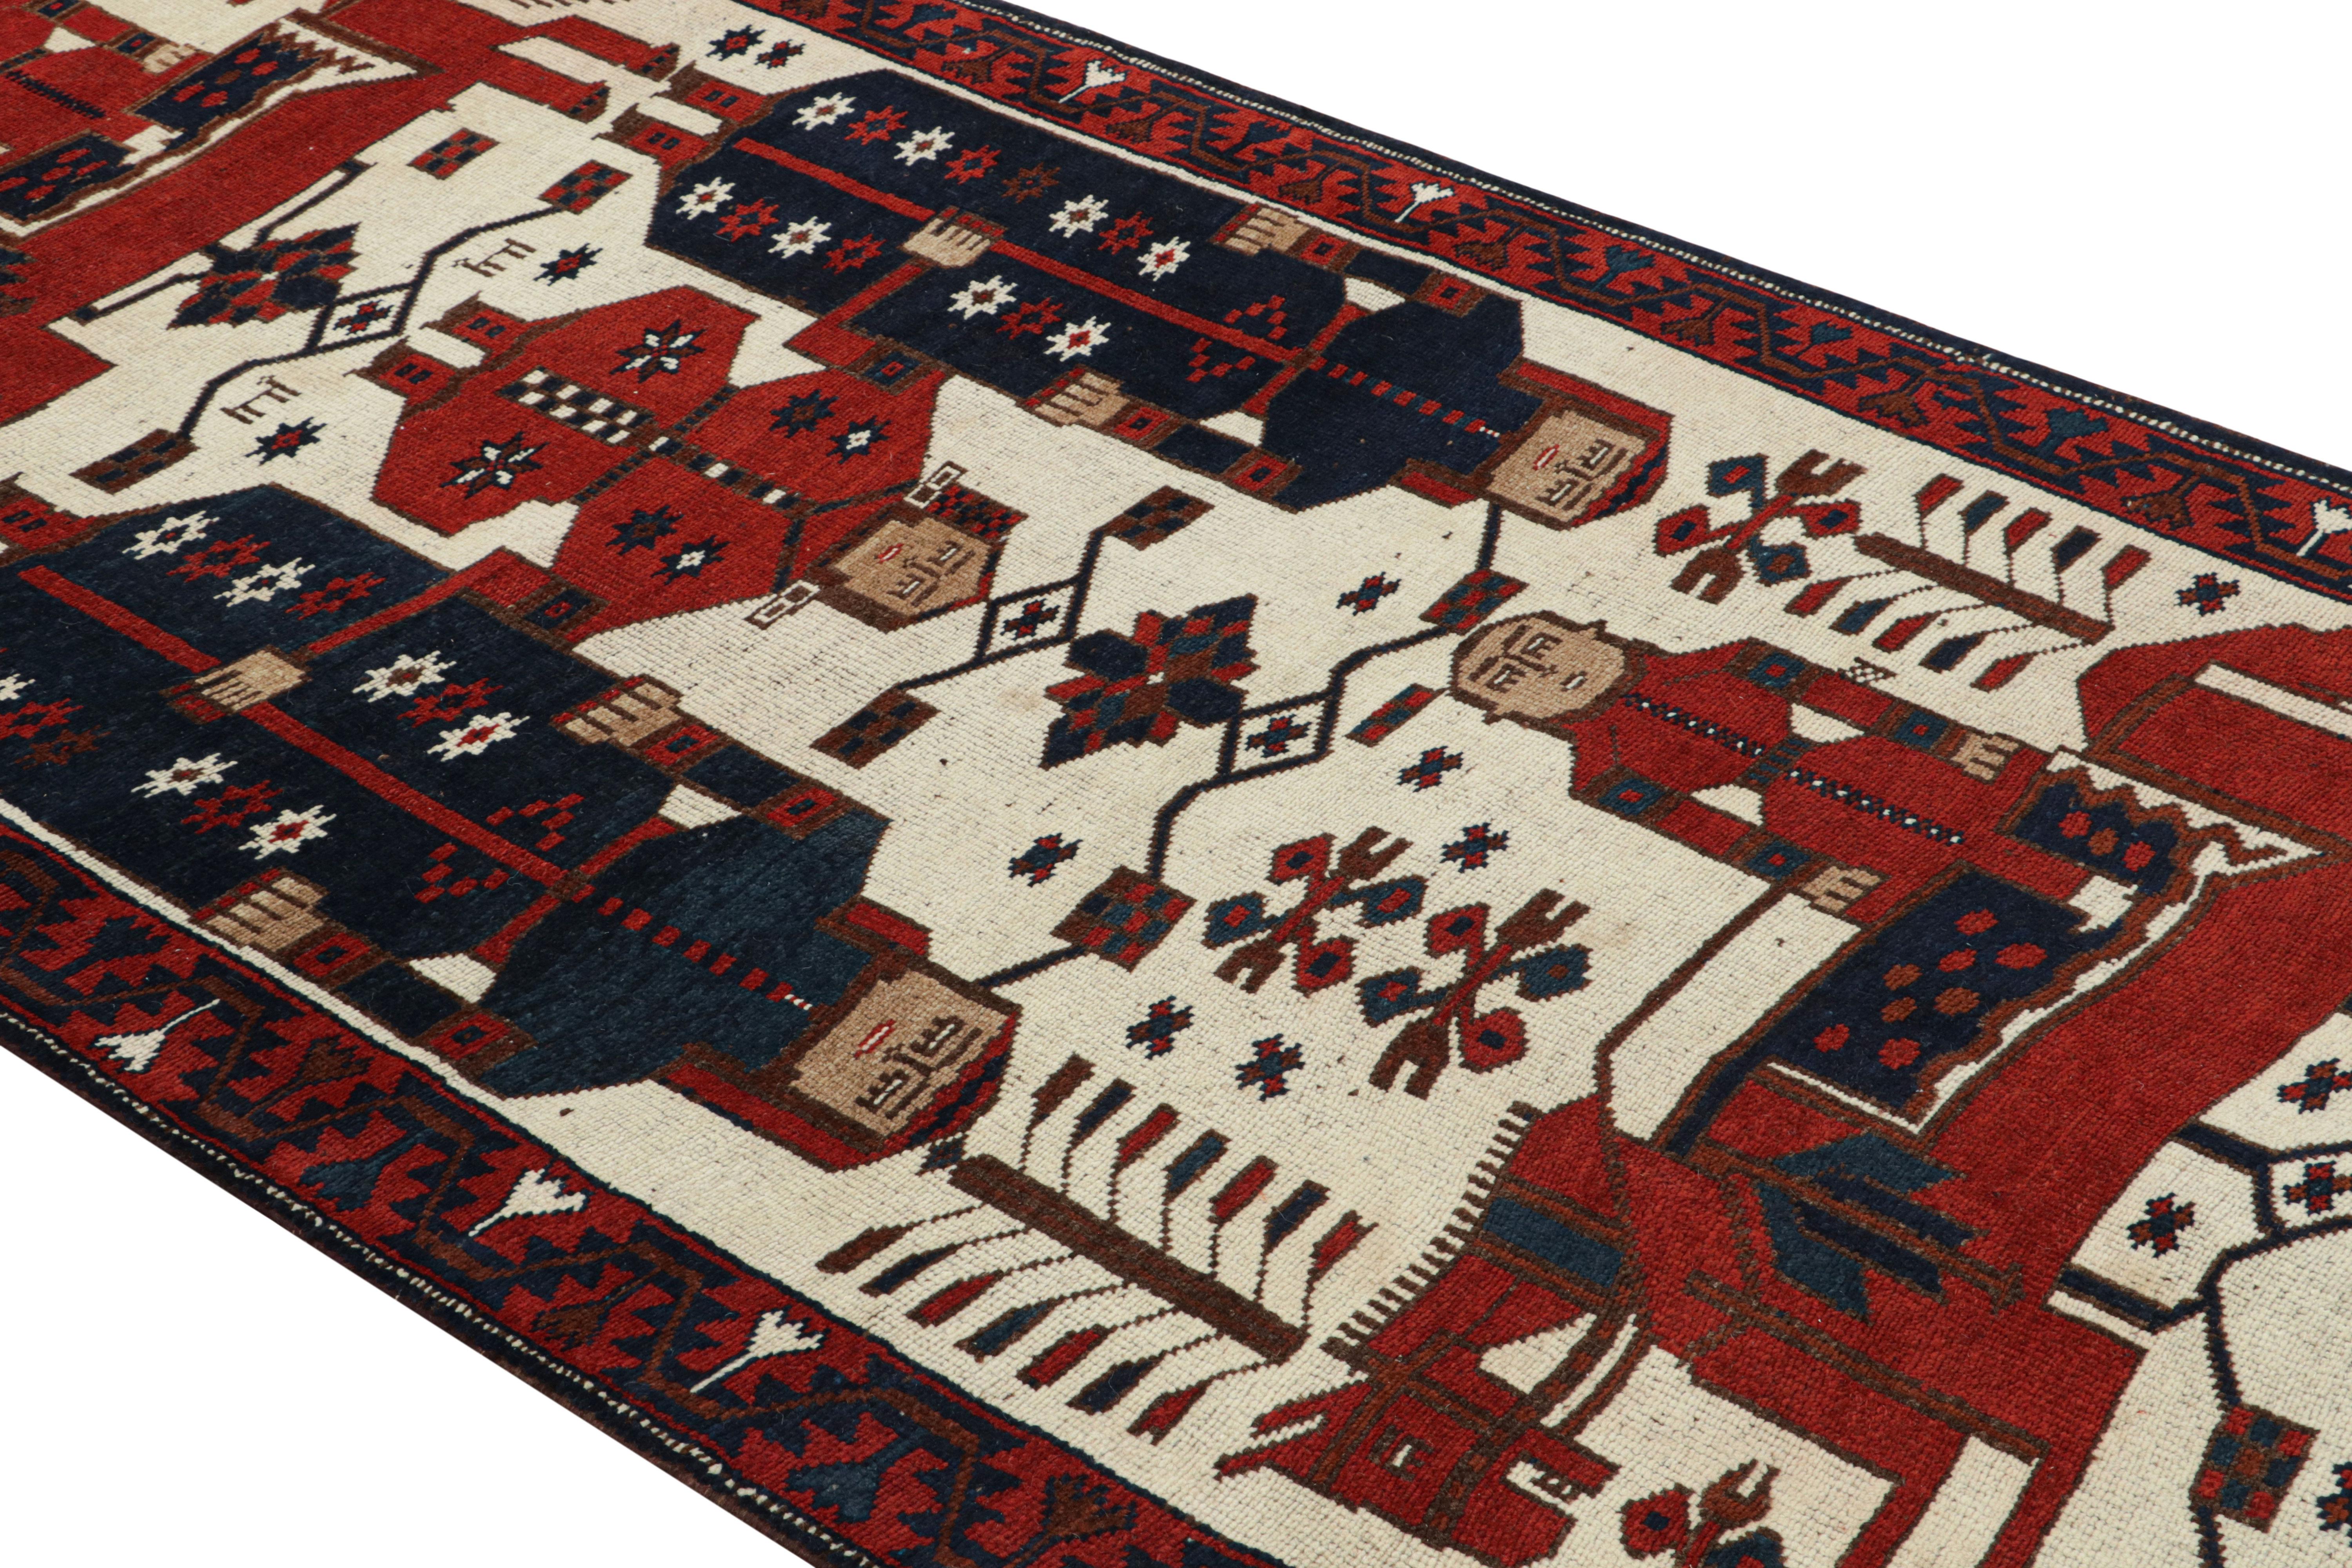 Hand-knotted in wool, a 4x14 runner from Rug & Kilim’s newly unveiled curation of rare tribal pieces. Originating from Turkey circa 1950-1960, a bold pictorial carpet as graphic as it is collectible. 

The design enjoys human and horse pictorials